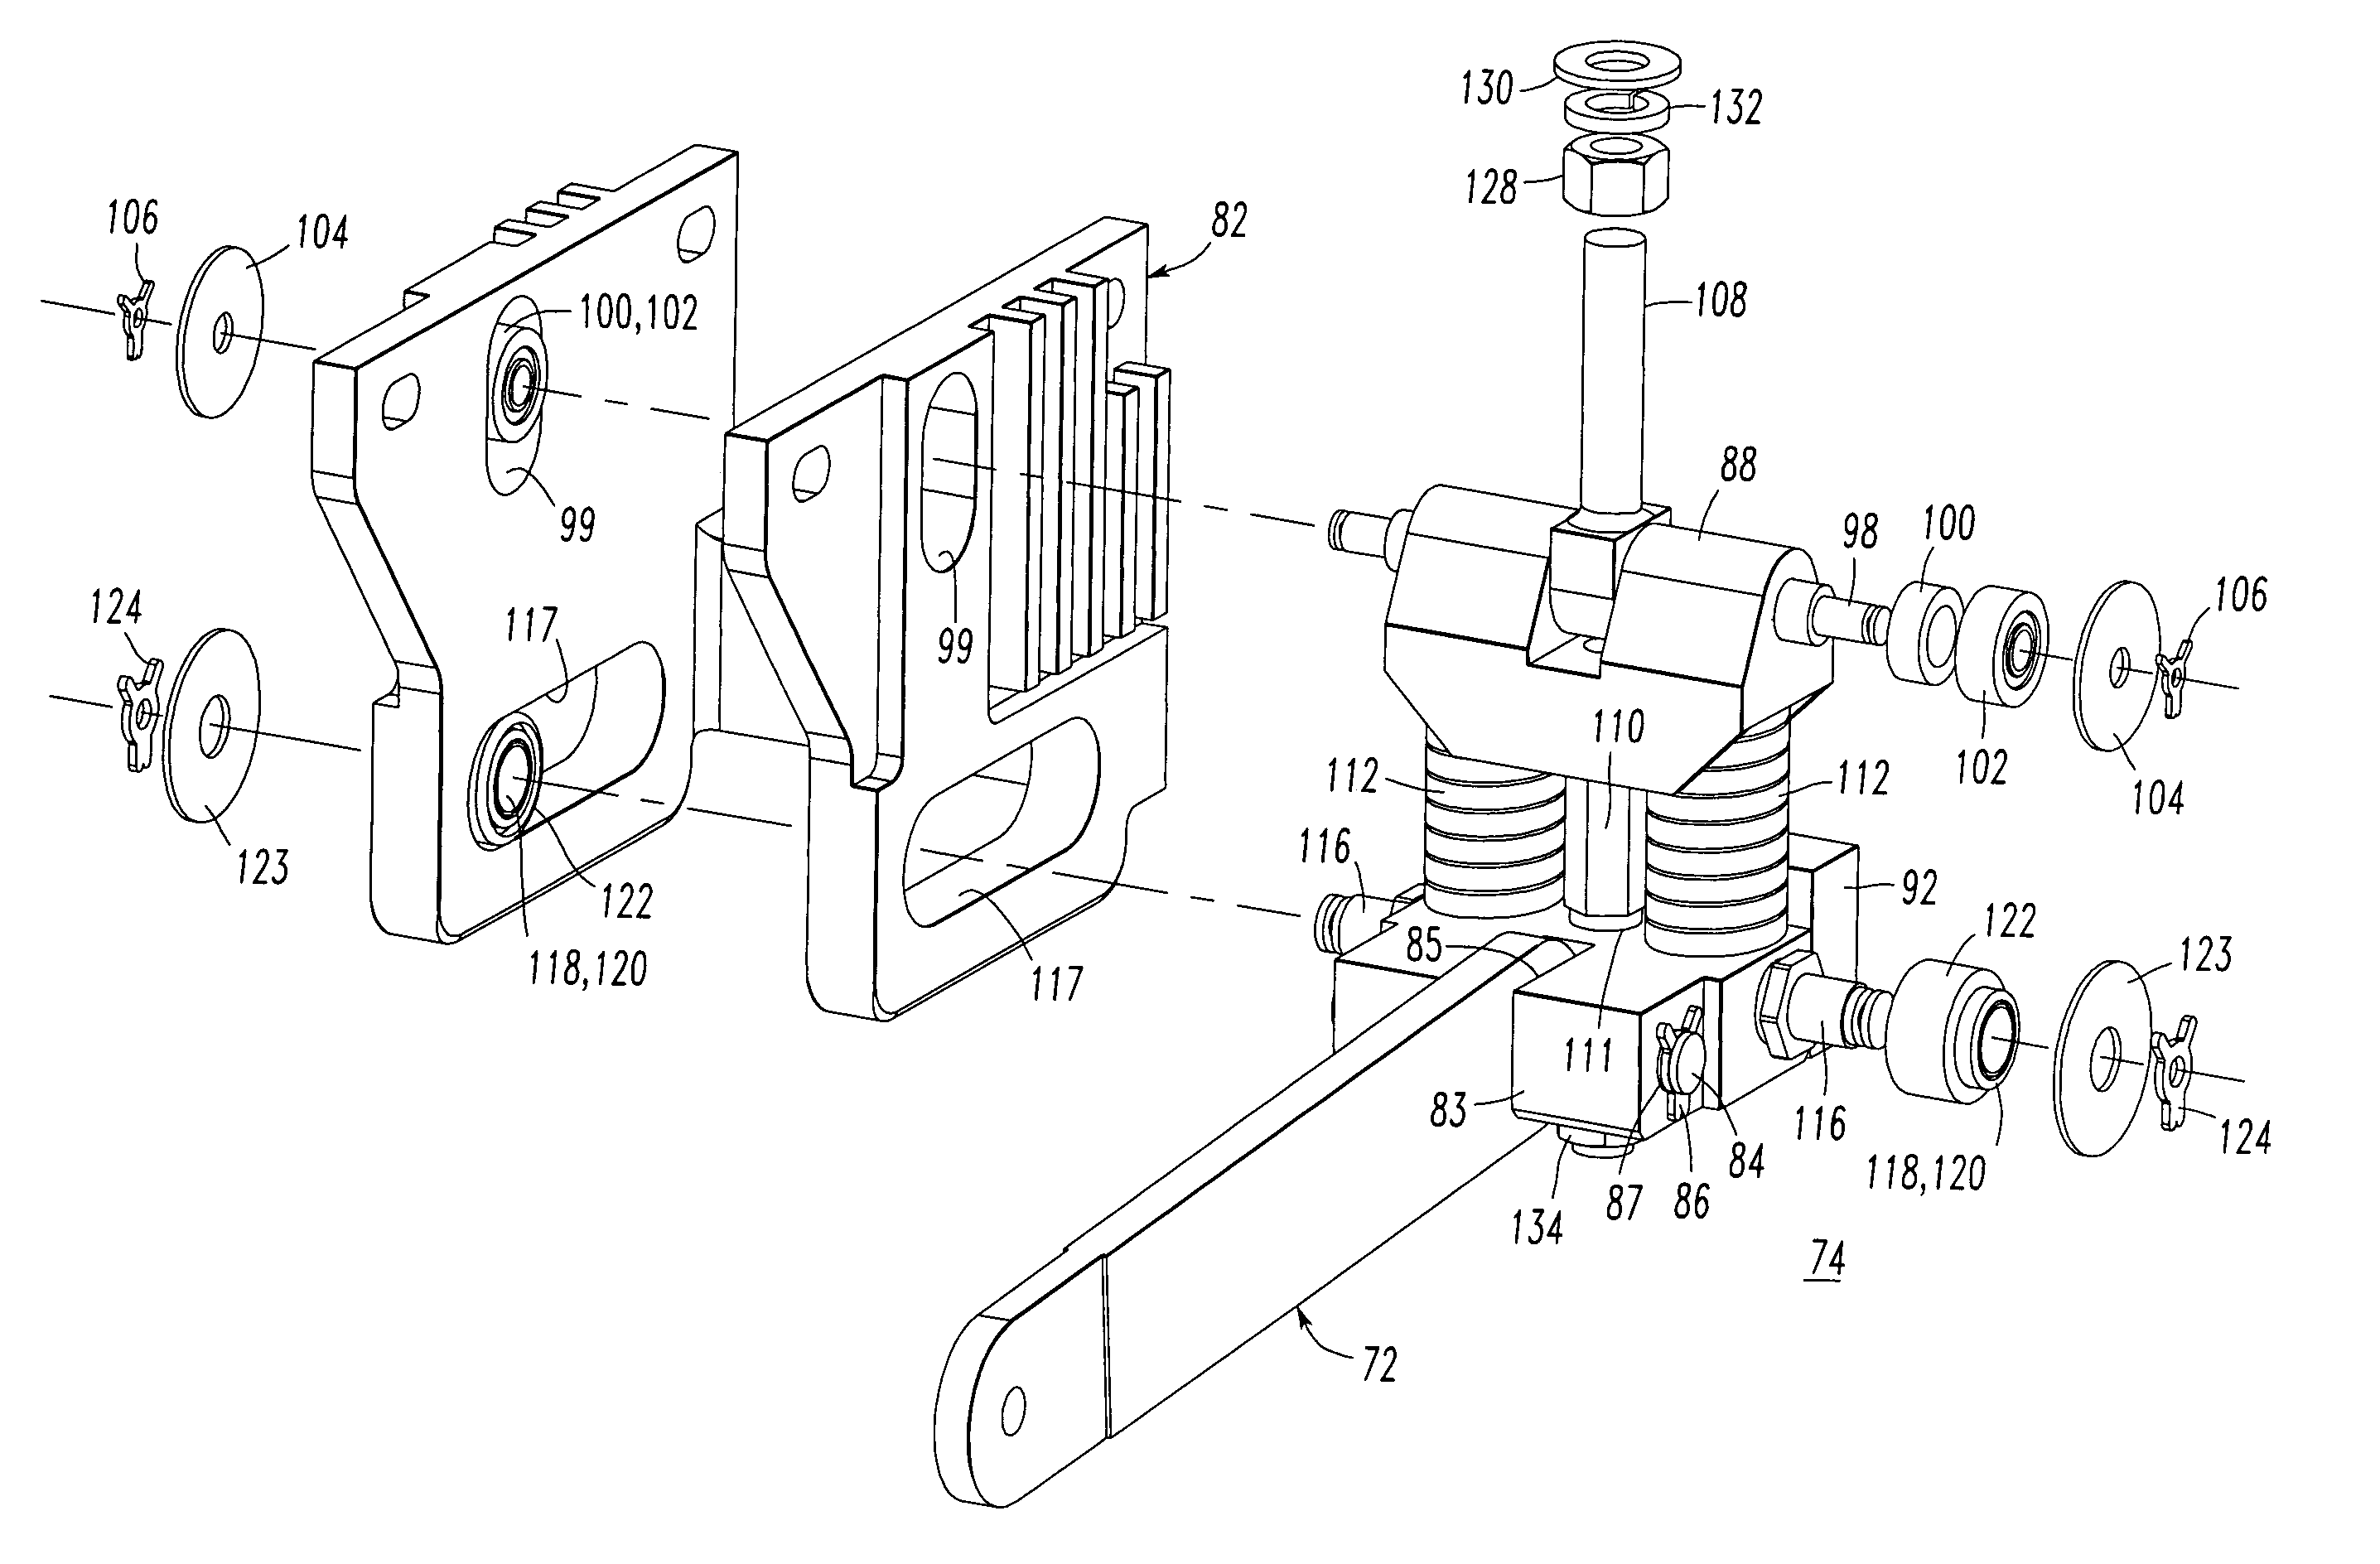 Spring-charged mechanism assembly employing two trunnion members moveable in different planes and circuit interrupter employing the same